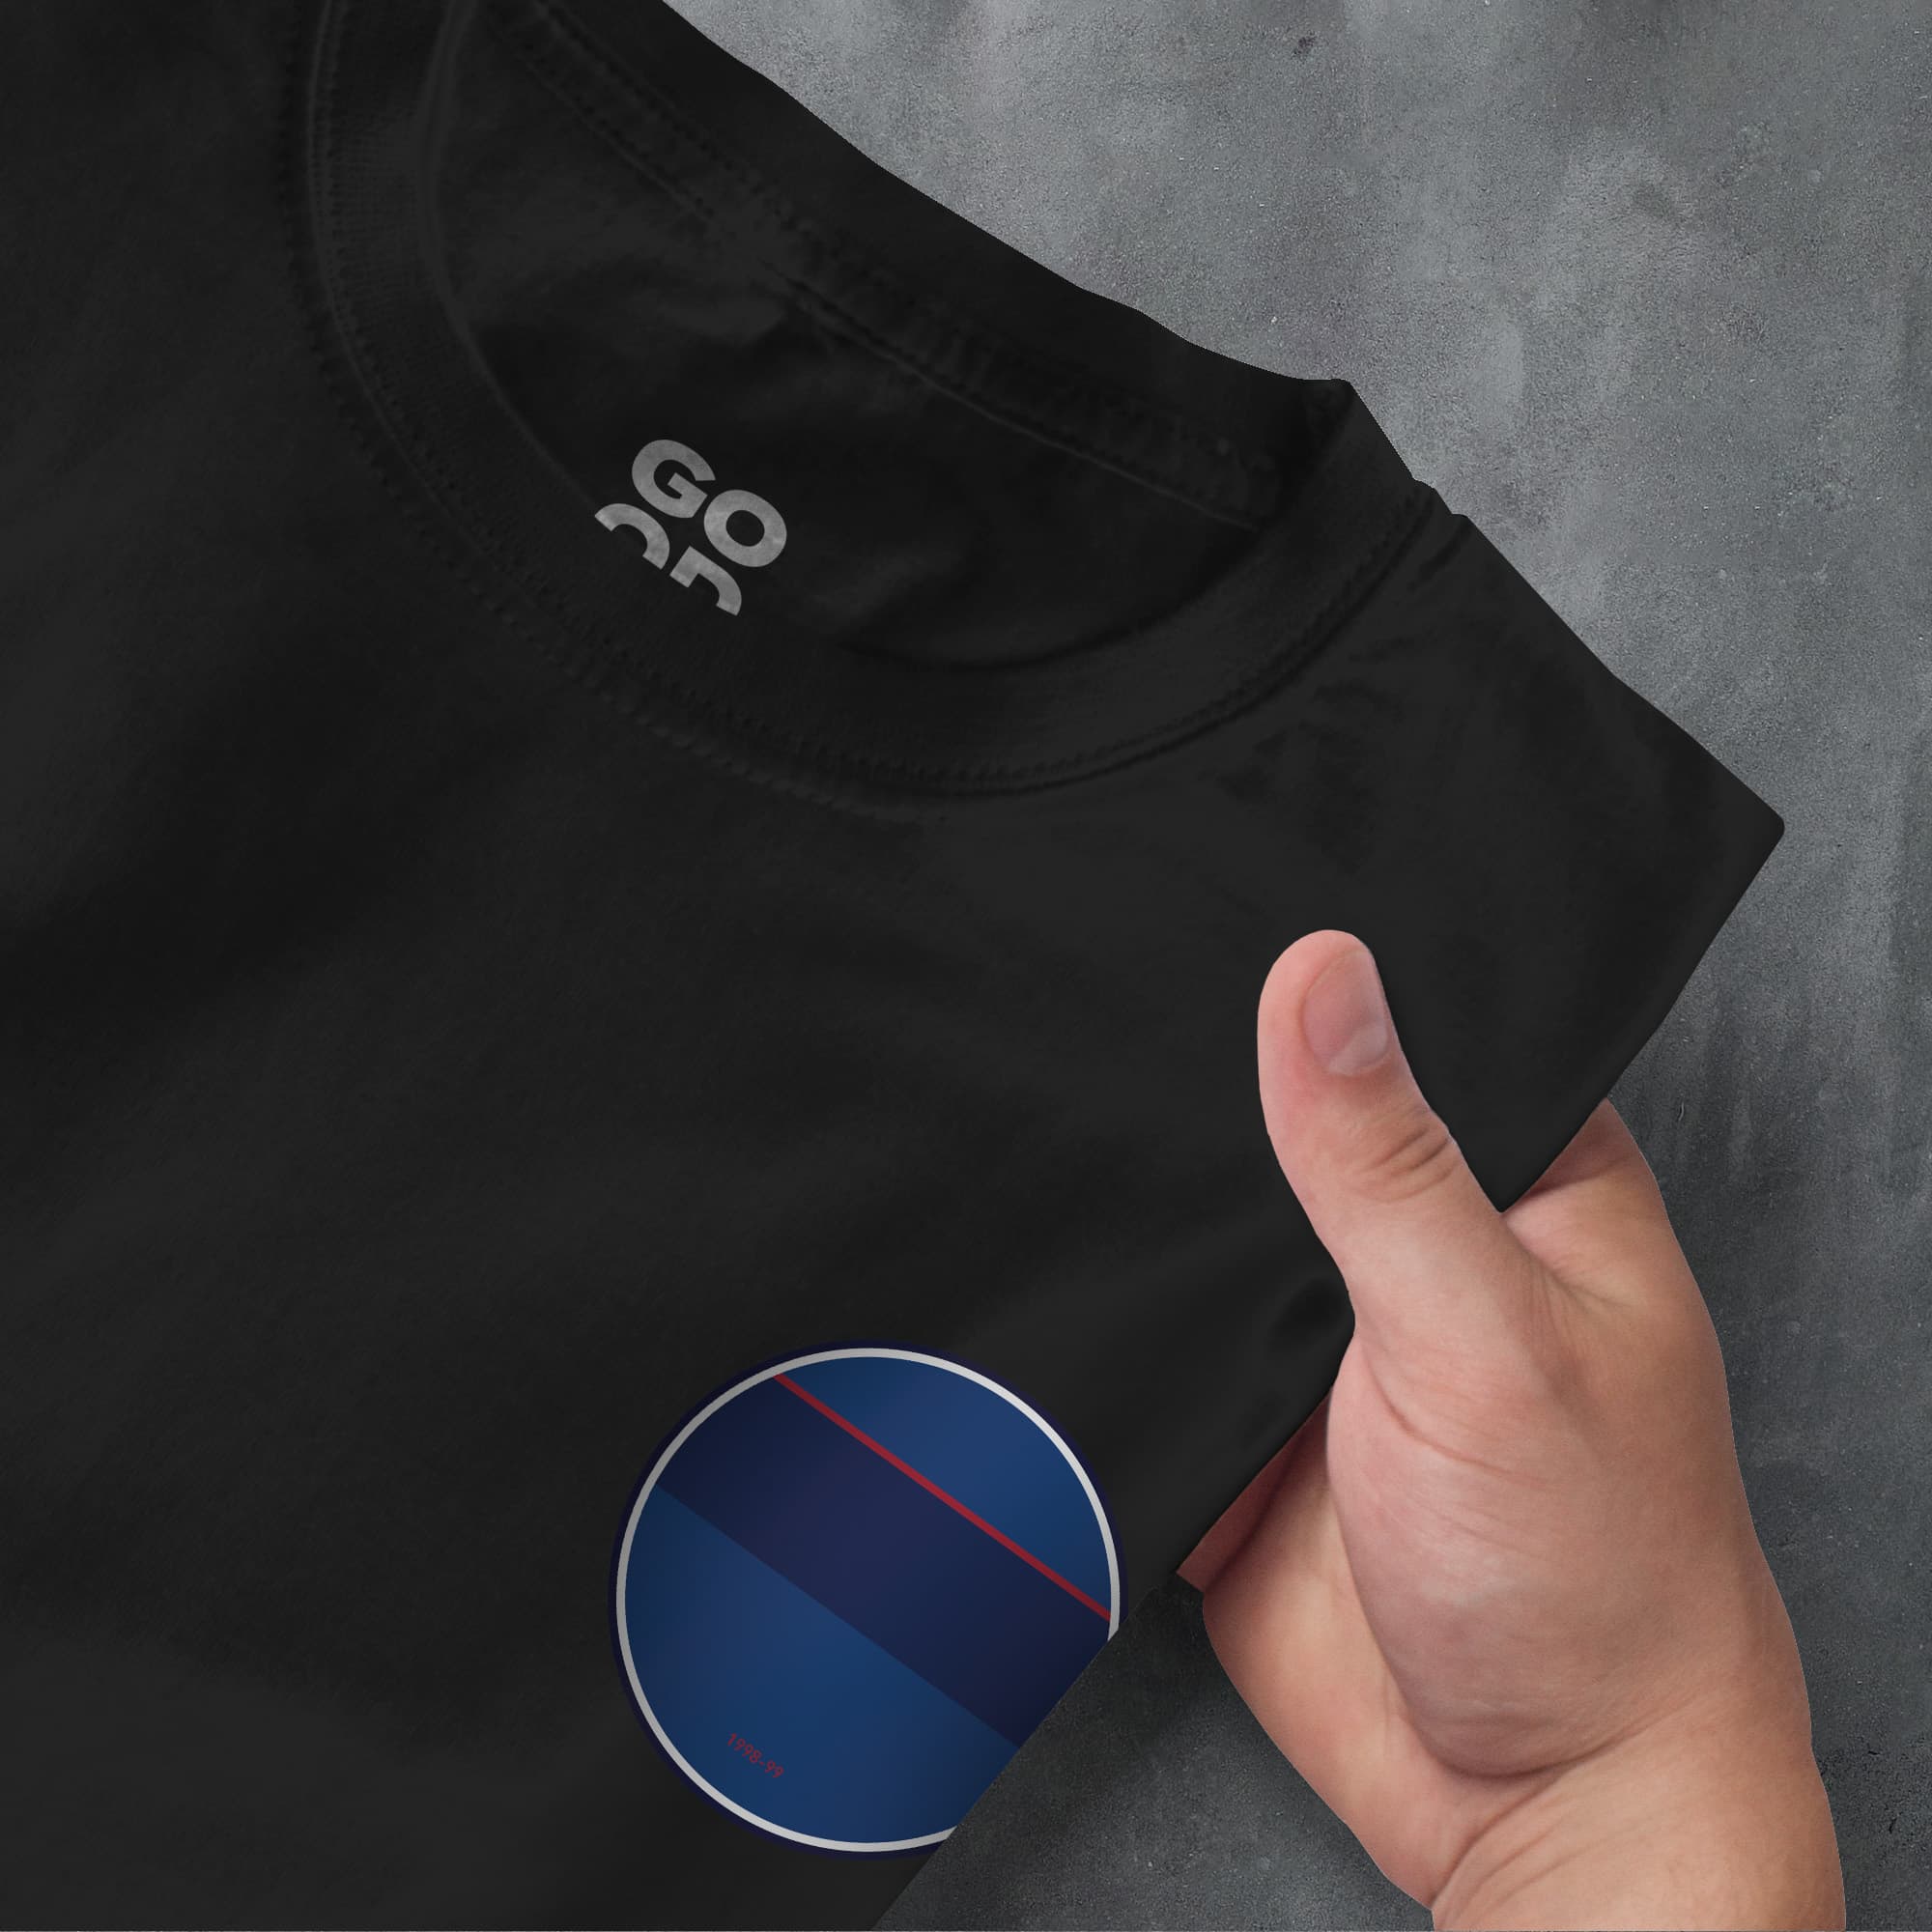 a hand pointing at a black shirt with a blue circle on it